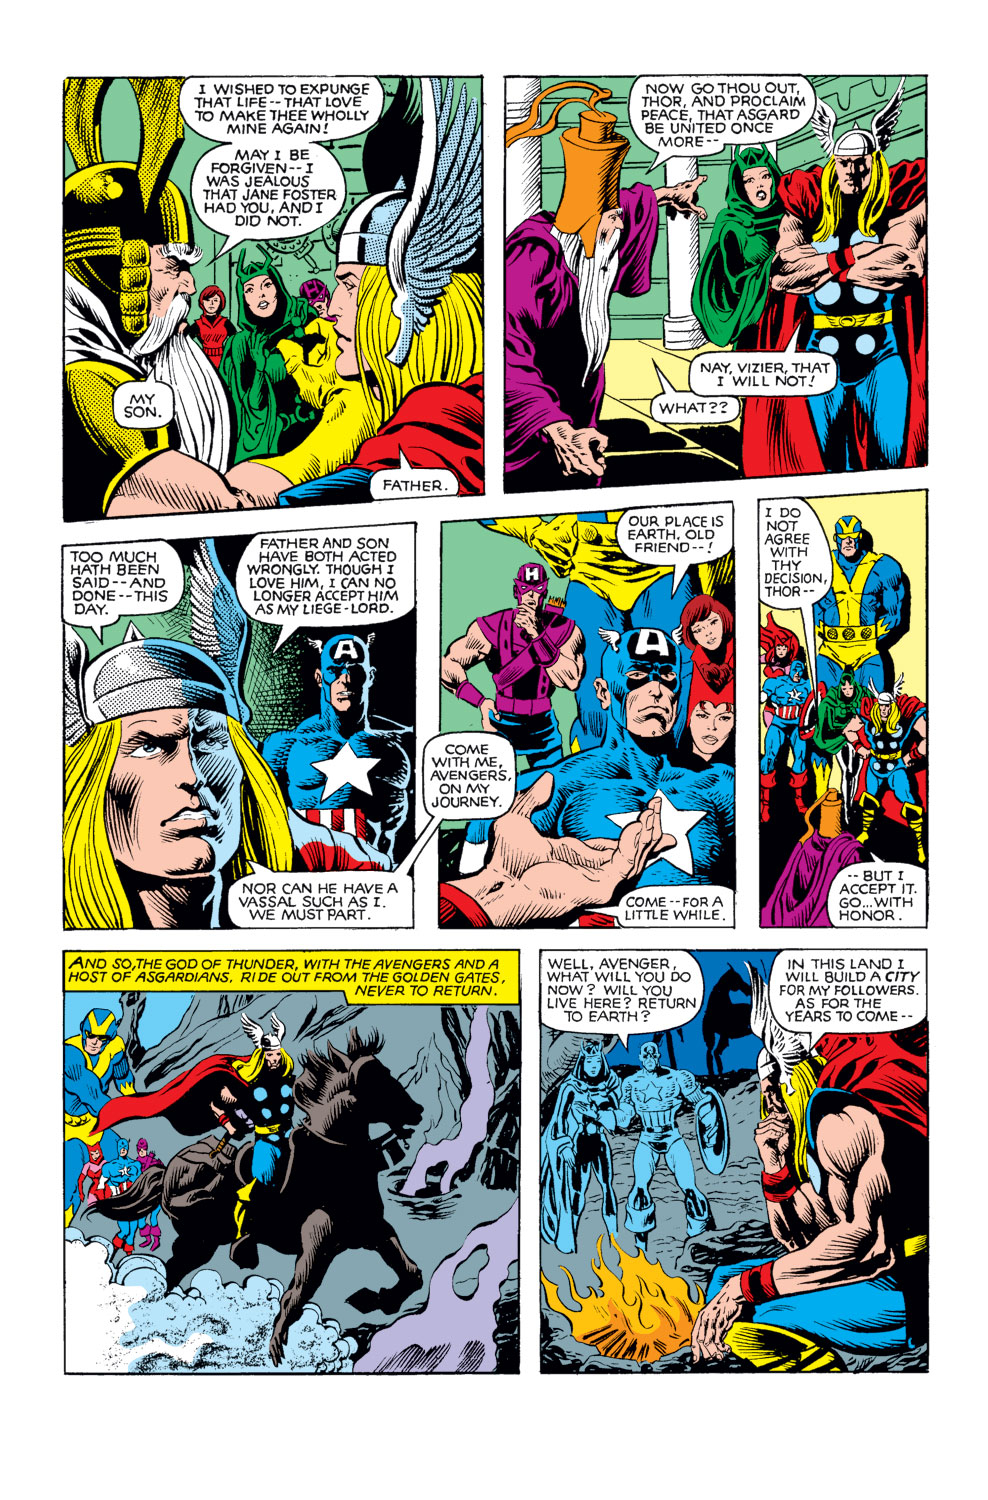 What If? (1977) Issue #25 - Thor and the Avengers battled the gods #25 - English 32